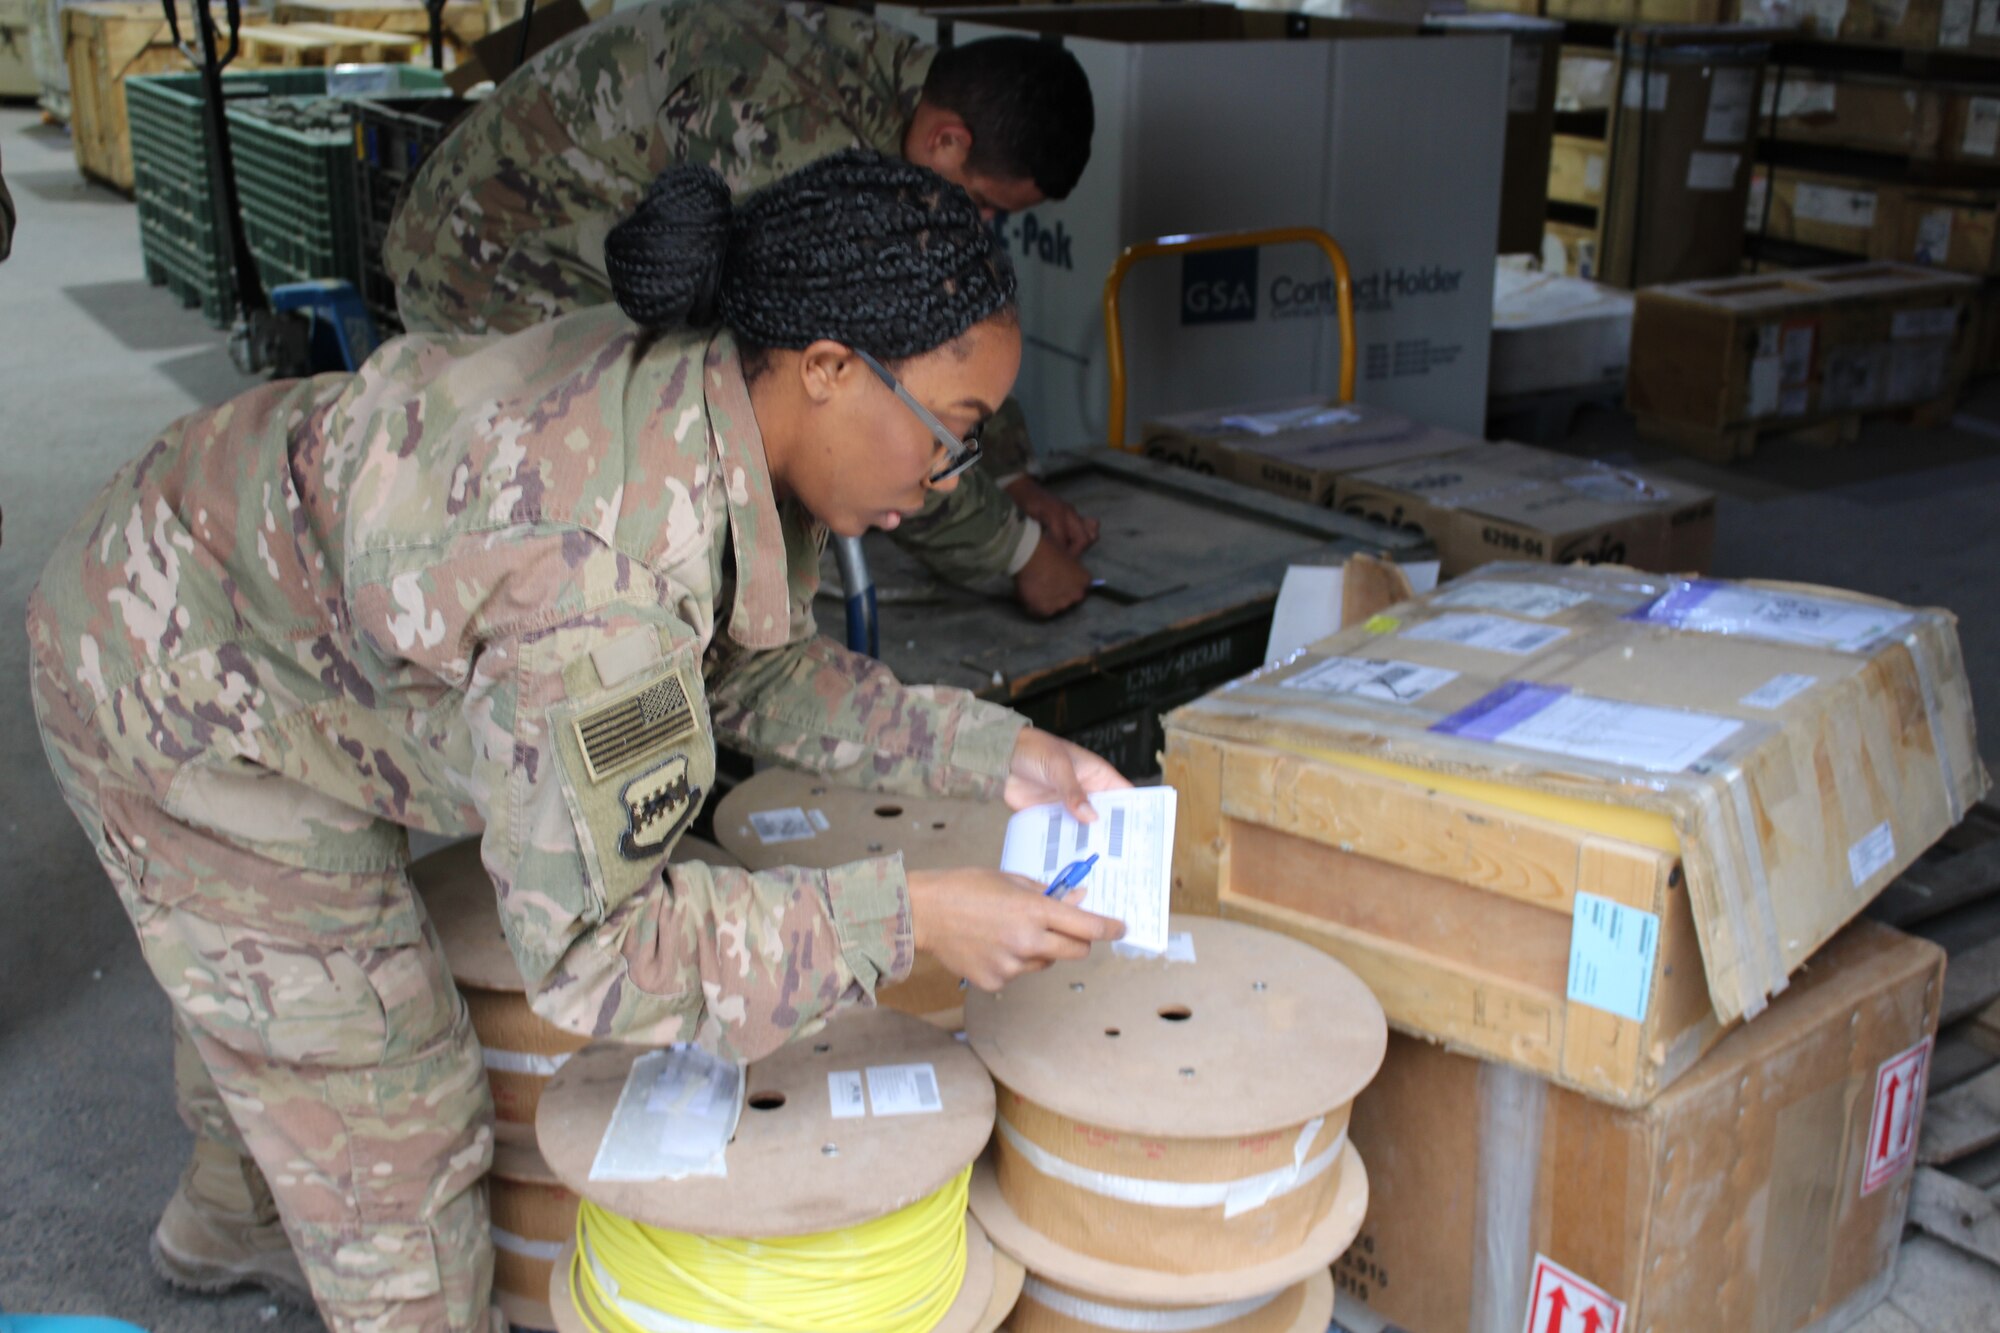 SOUTHWEST ASIA – Senior Airman Cheyenne Smith, 332nd Air Expeditionary Wing, 332nd Expeditionary Logistics Readiness Squadron customer service representative, checks the invoice numbers on an outgoing shipment at an undisclosed location, January 19.  At its busiest, the 332 ELRS moves over 4,500 personnel and 5,000 short tons (10 million lbs.) of cargo every 3-months. (US Air Force photo by Maj. John T. Stamm)